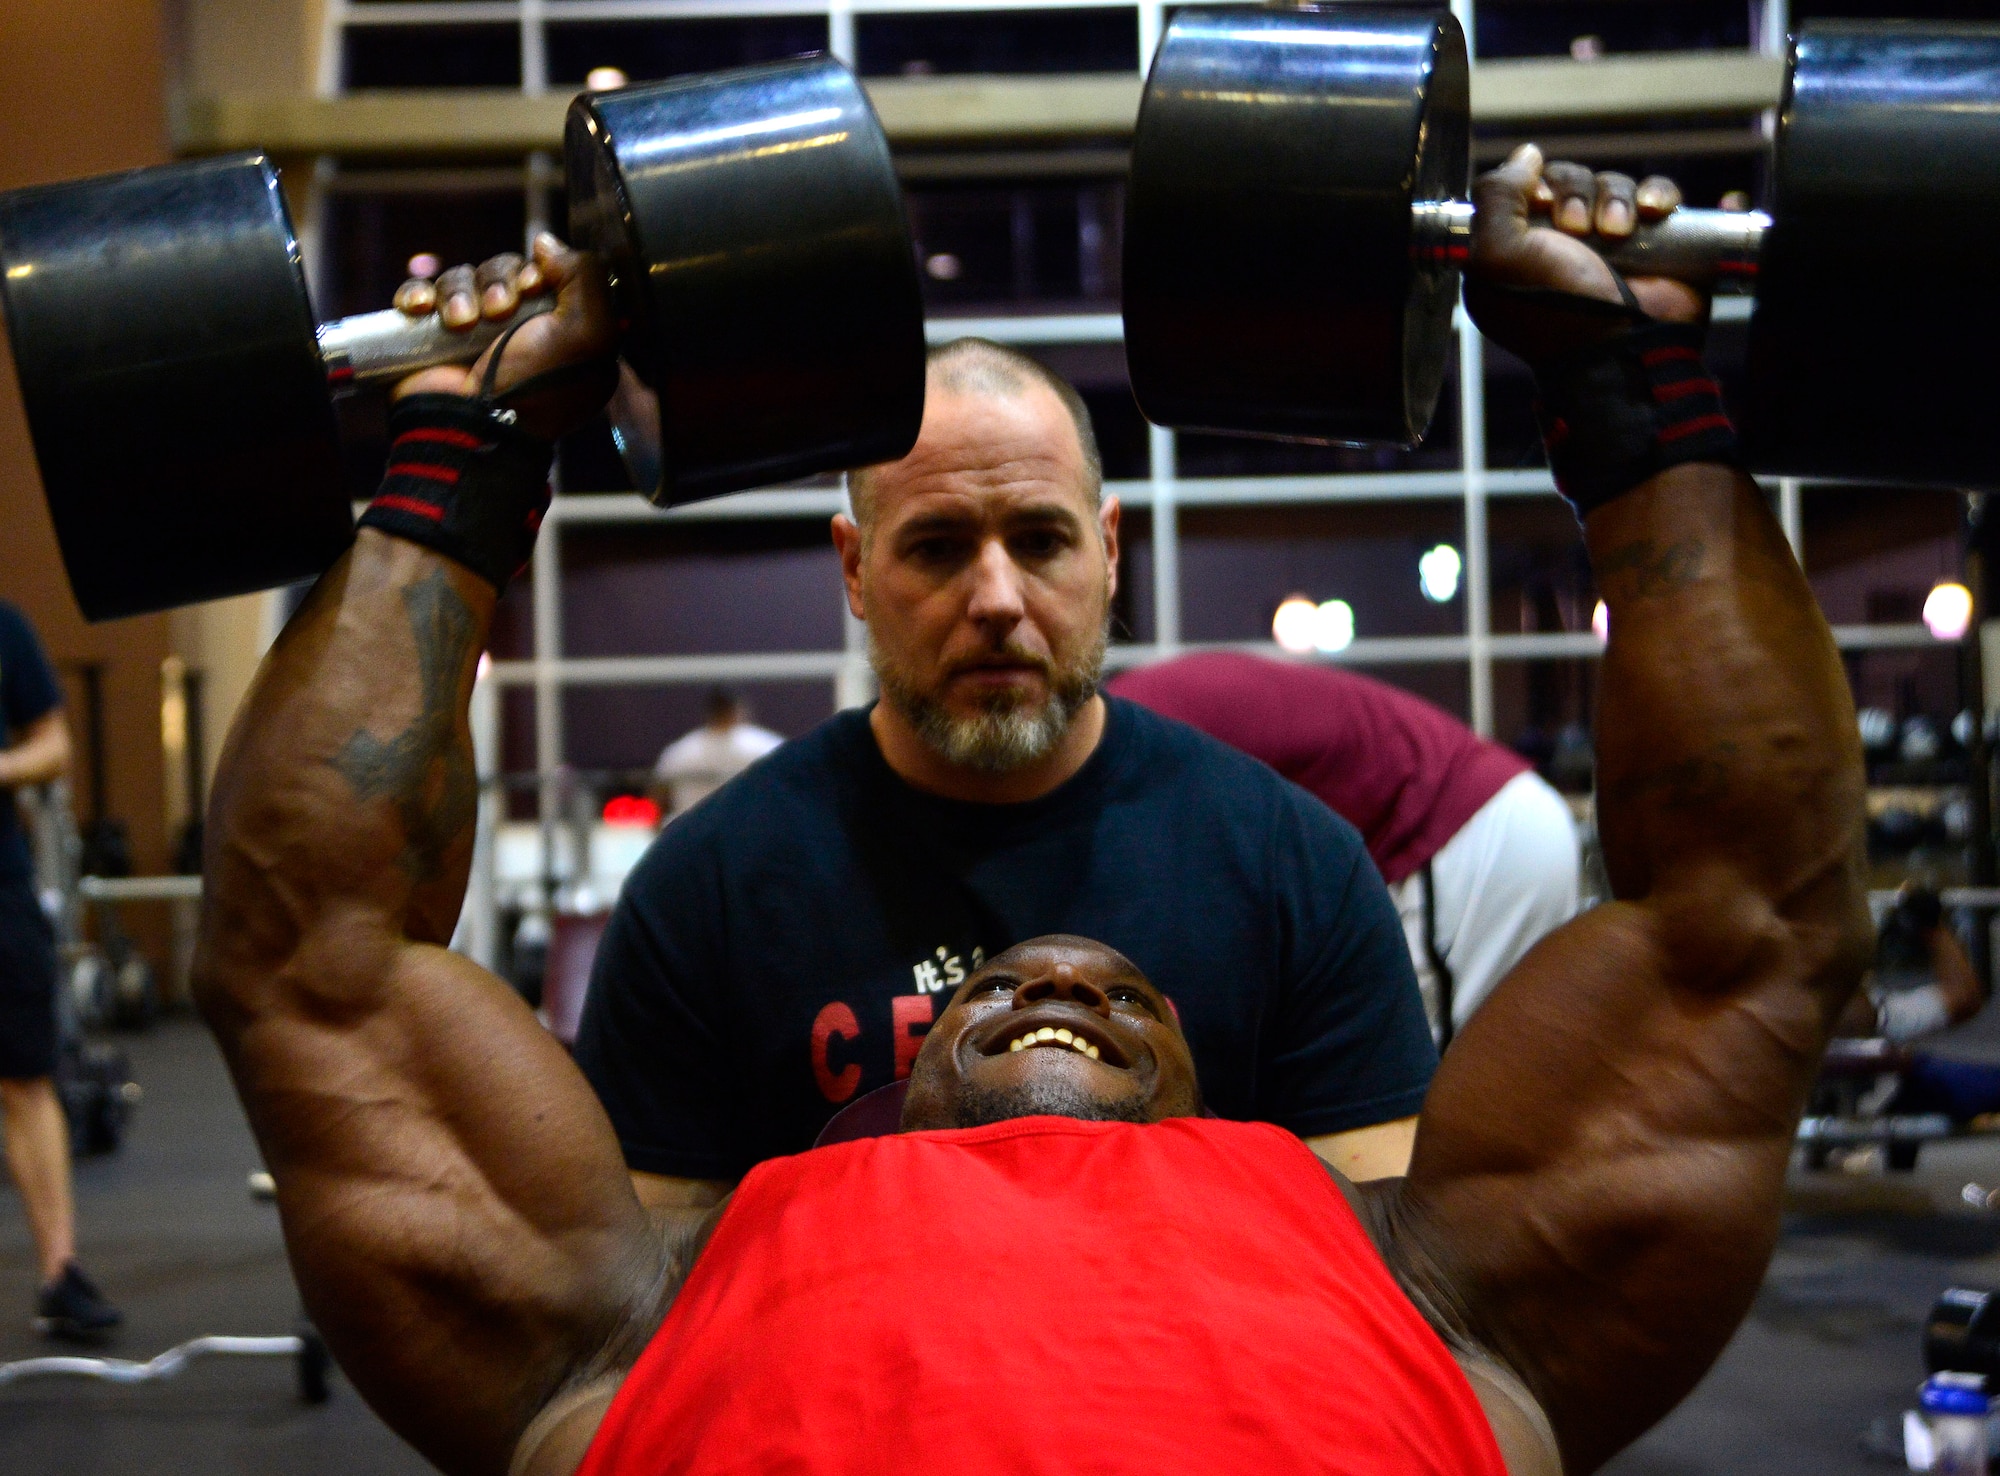 Tech. Sgt. David, a 432nd Maintenance Group contract officer representative, performs chest fly repetitions while his trainer, Derrick Chandler, motivates him during a workout Dec. 4, 2015, at Nellis Air Force Base, Nevada. David recently attained his International Federation of Bodybuilding and Fitness professional card, which allows him to compete in professional bodybuilding competitions. (U.S. Air Force photo/Airman 1st Class Christian Clausen)